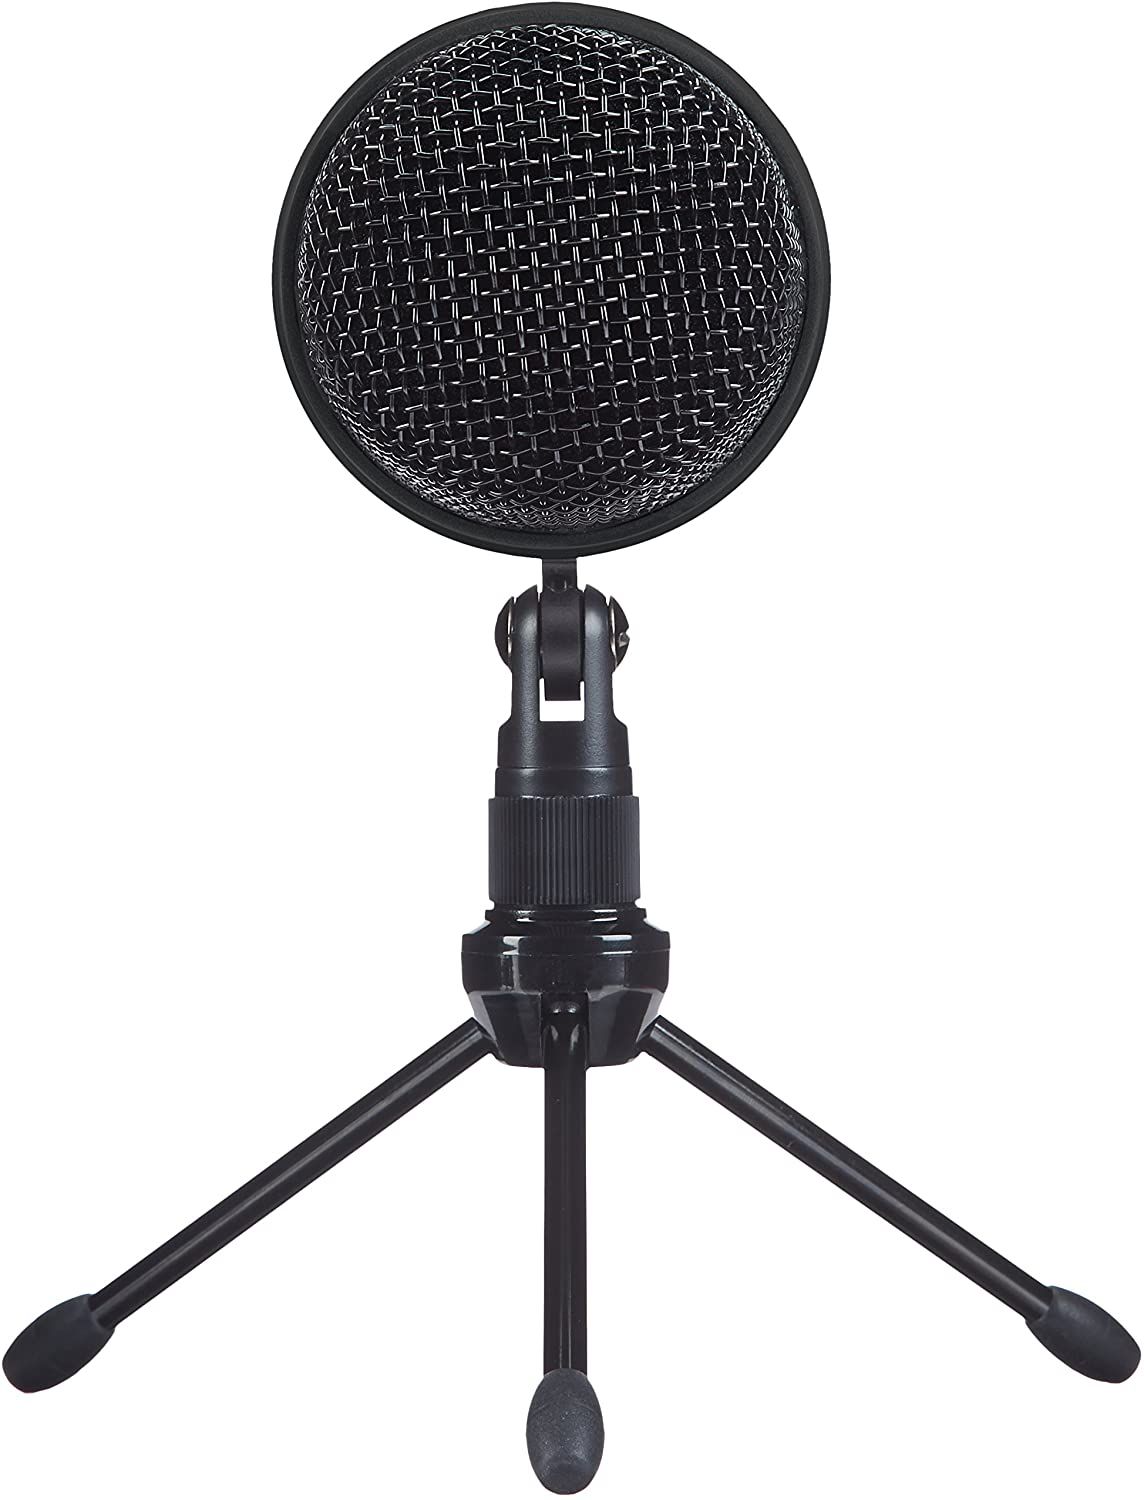 A visual showing the front side view of Amazon basics microphone